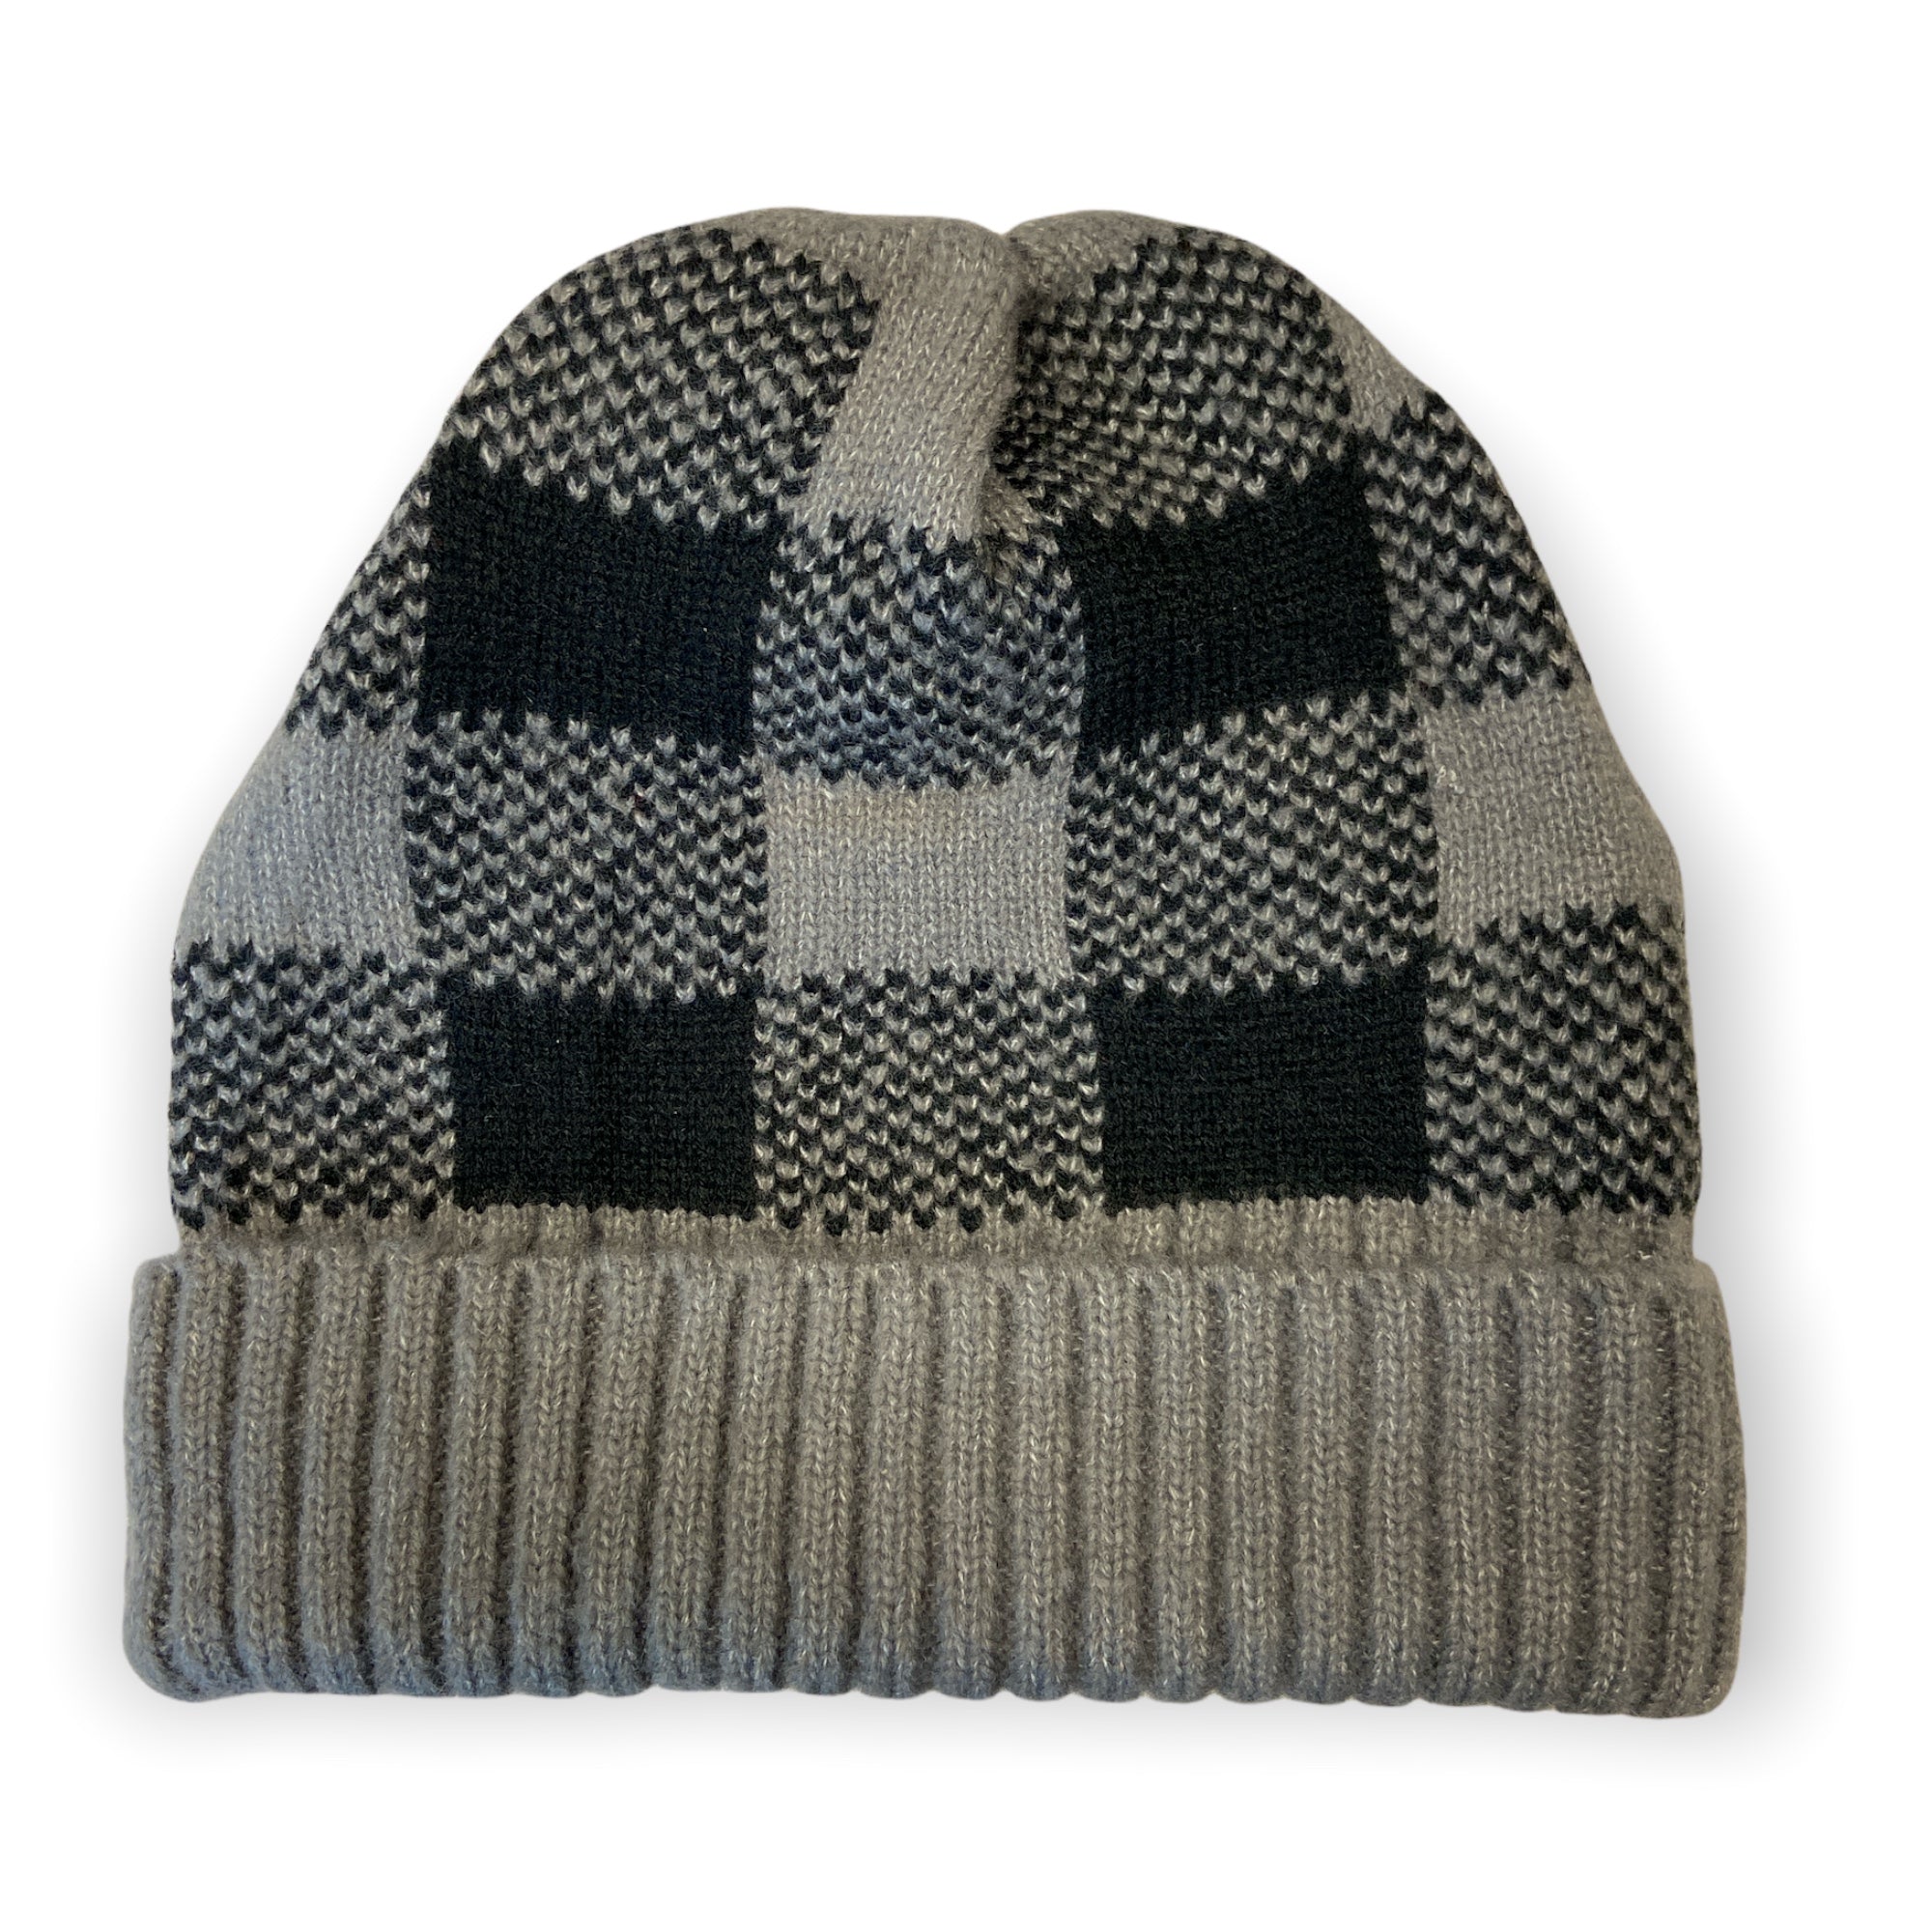 Buffalo Check Knit Winter Beanie Hat | Available in 3 Colors